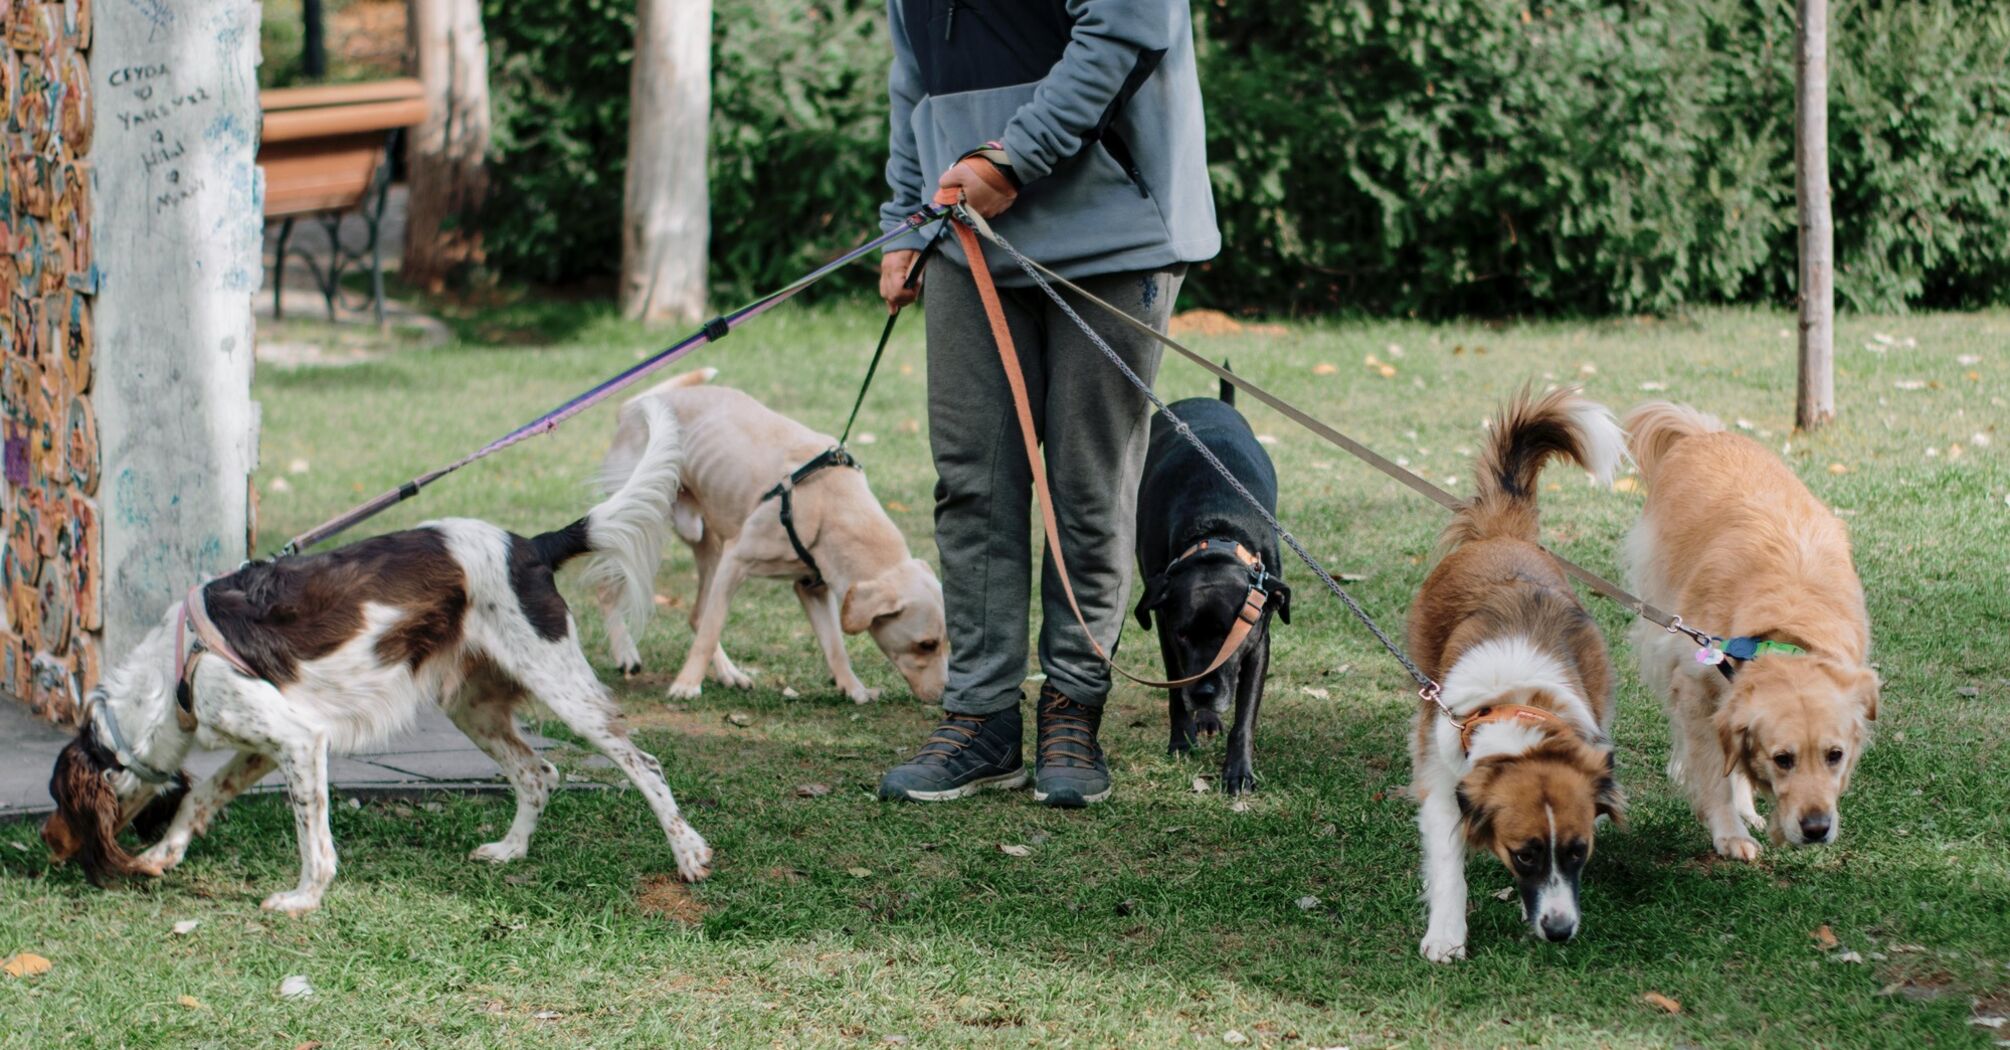 Why dogs love parks and how it affects owners?